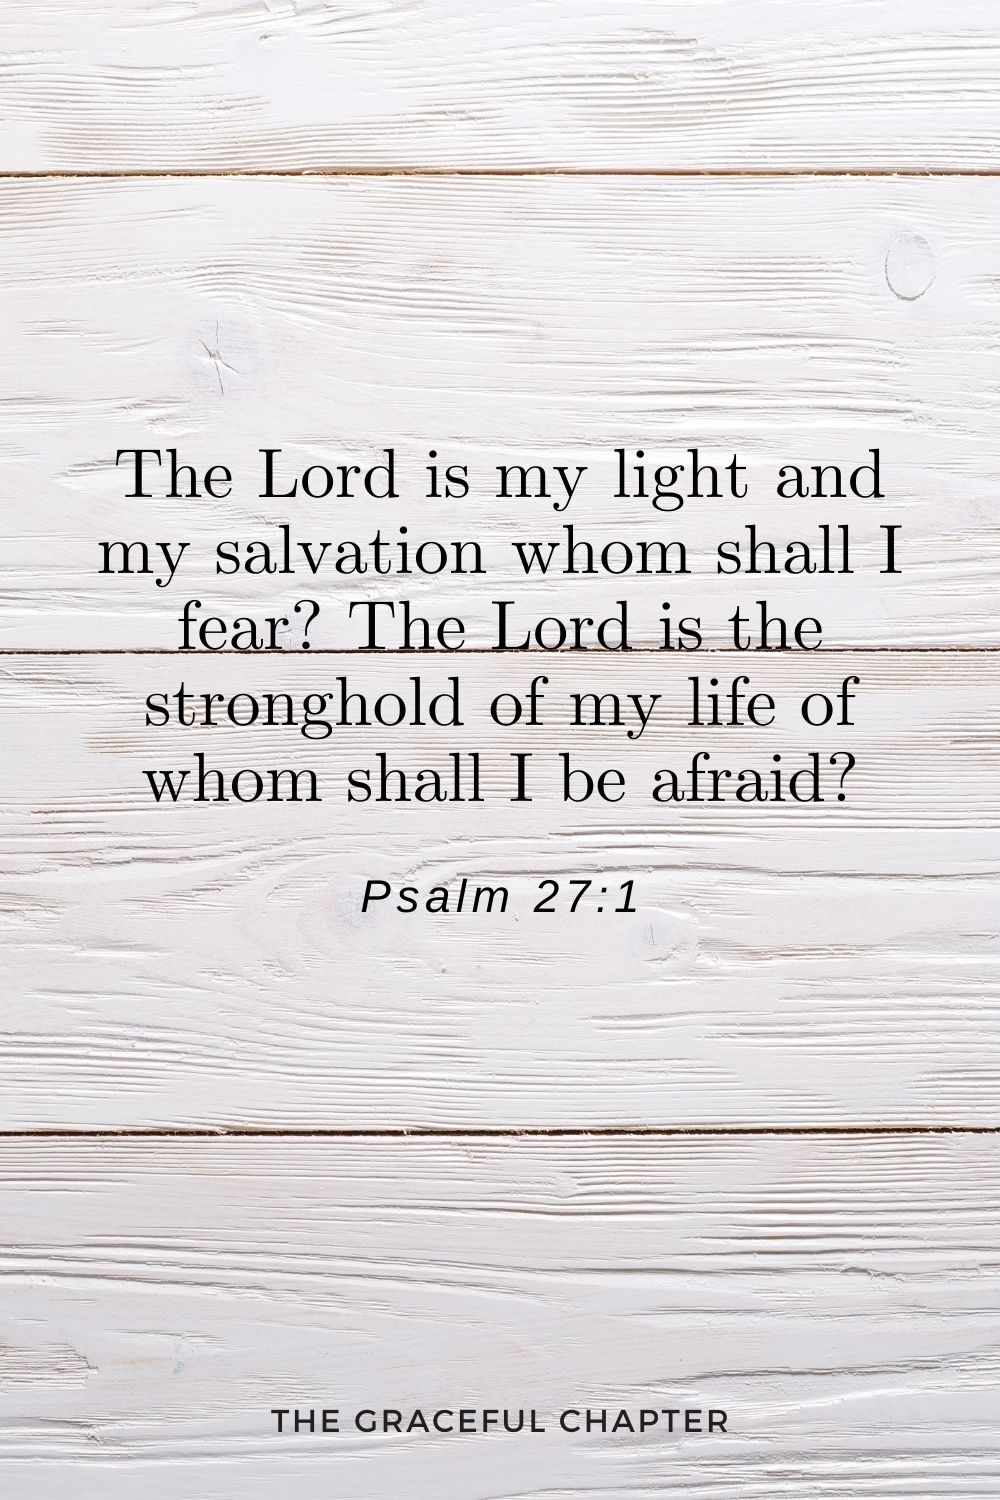 The Lord is my light and my salvation whom shall I fear? The Lord is the stronghold of my life of whom shall I be afraid? Psalm 27:1